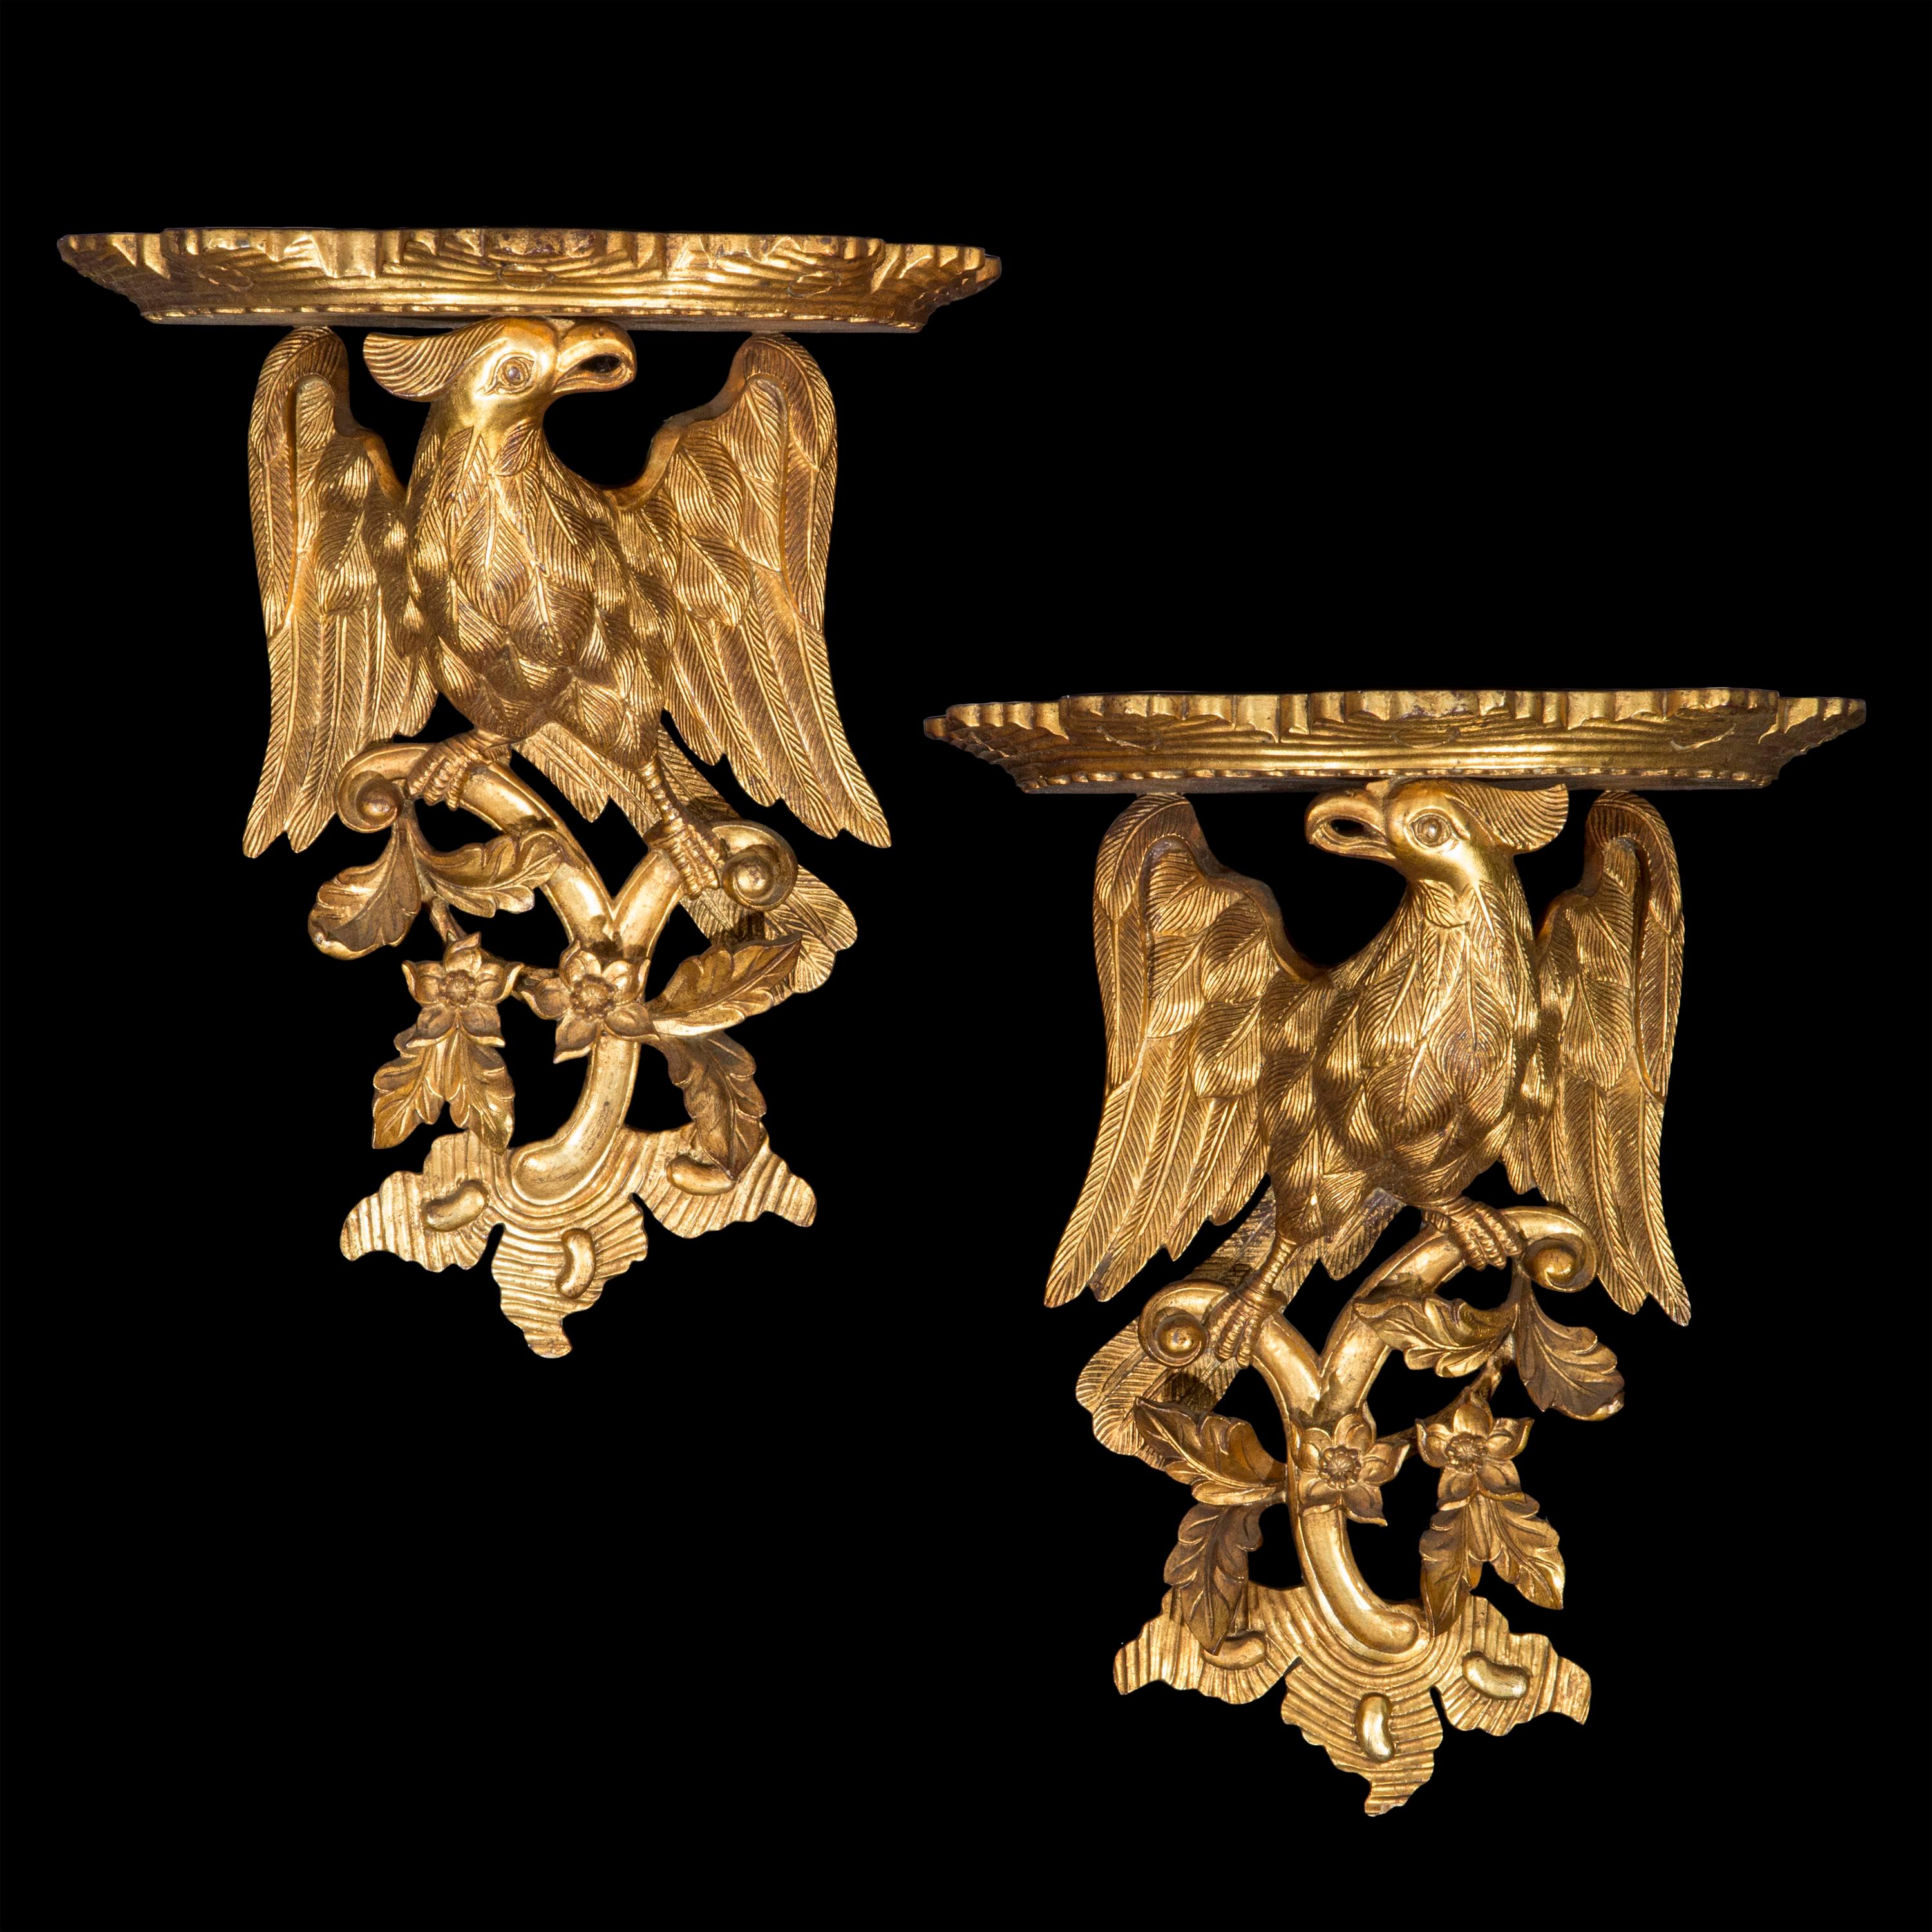 A pair of chinoiserie giltwood wall brackets.
Continental, circa 1950.

Why we like them
Wonderfully sculptural, superbly decorative 18th century 'Chinoiserie meets Rococo' design, with Ho-Ho birds perched on scrolled branches. 

A very chic